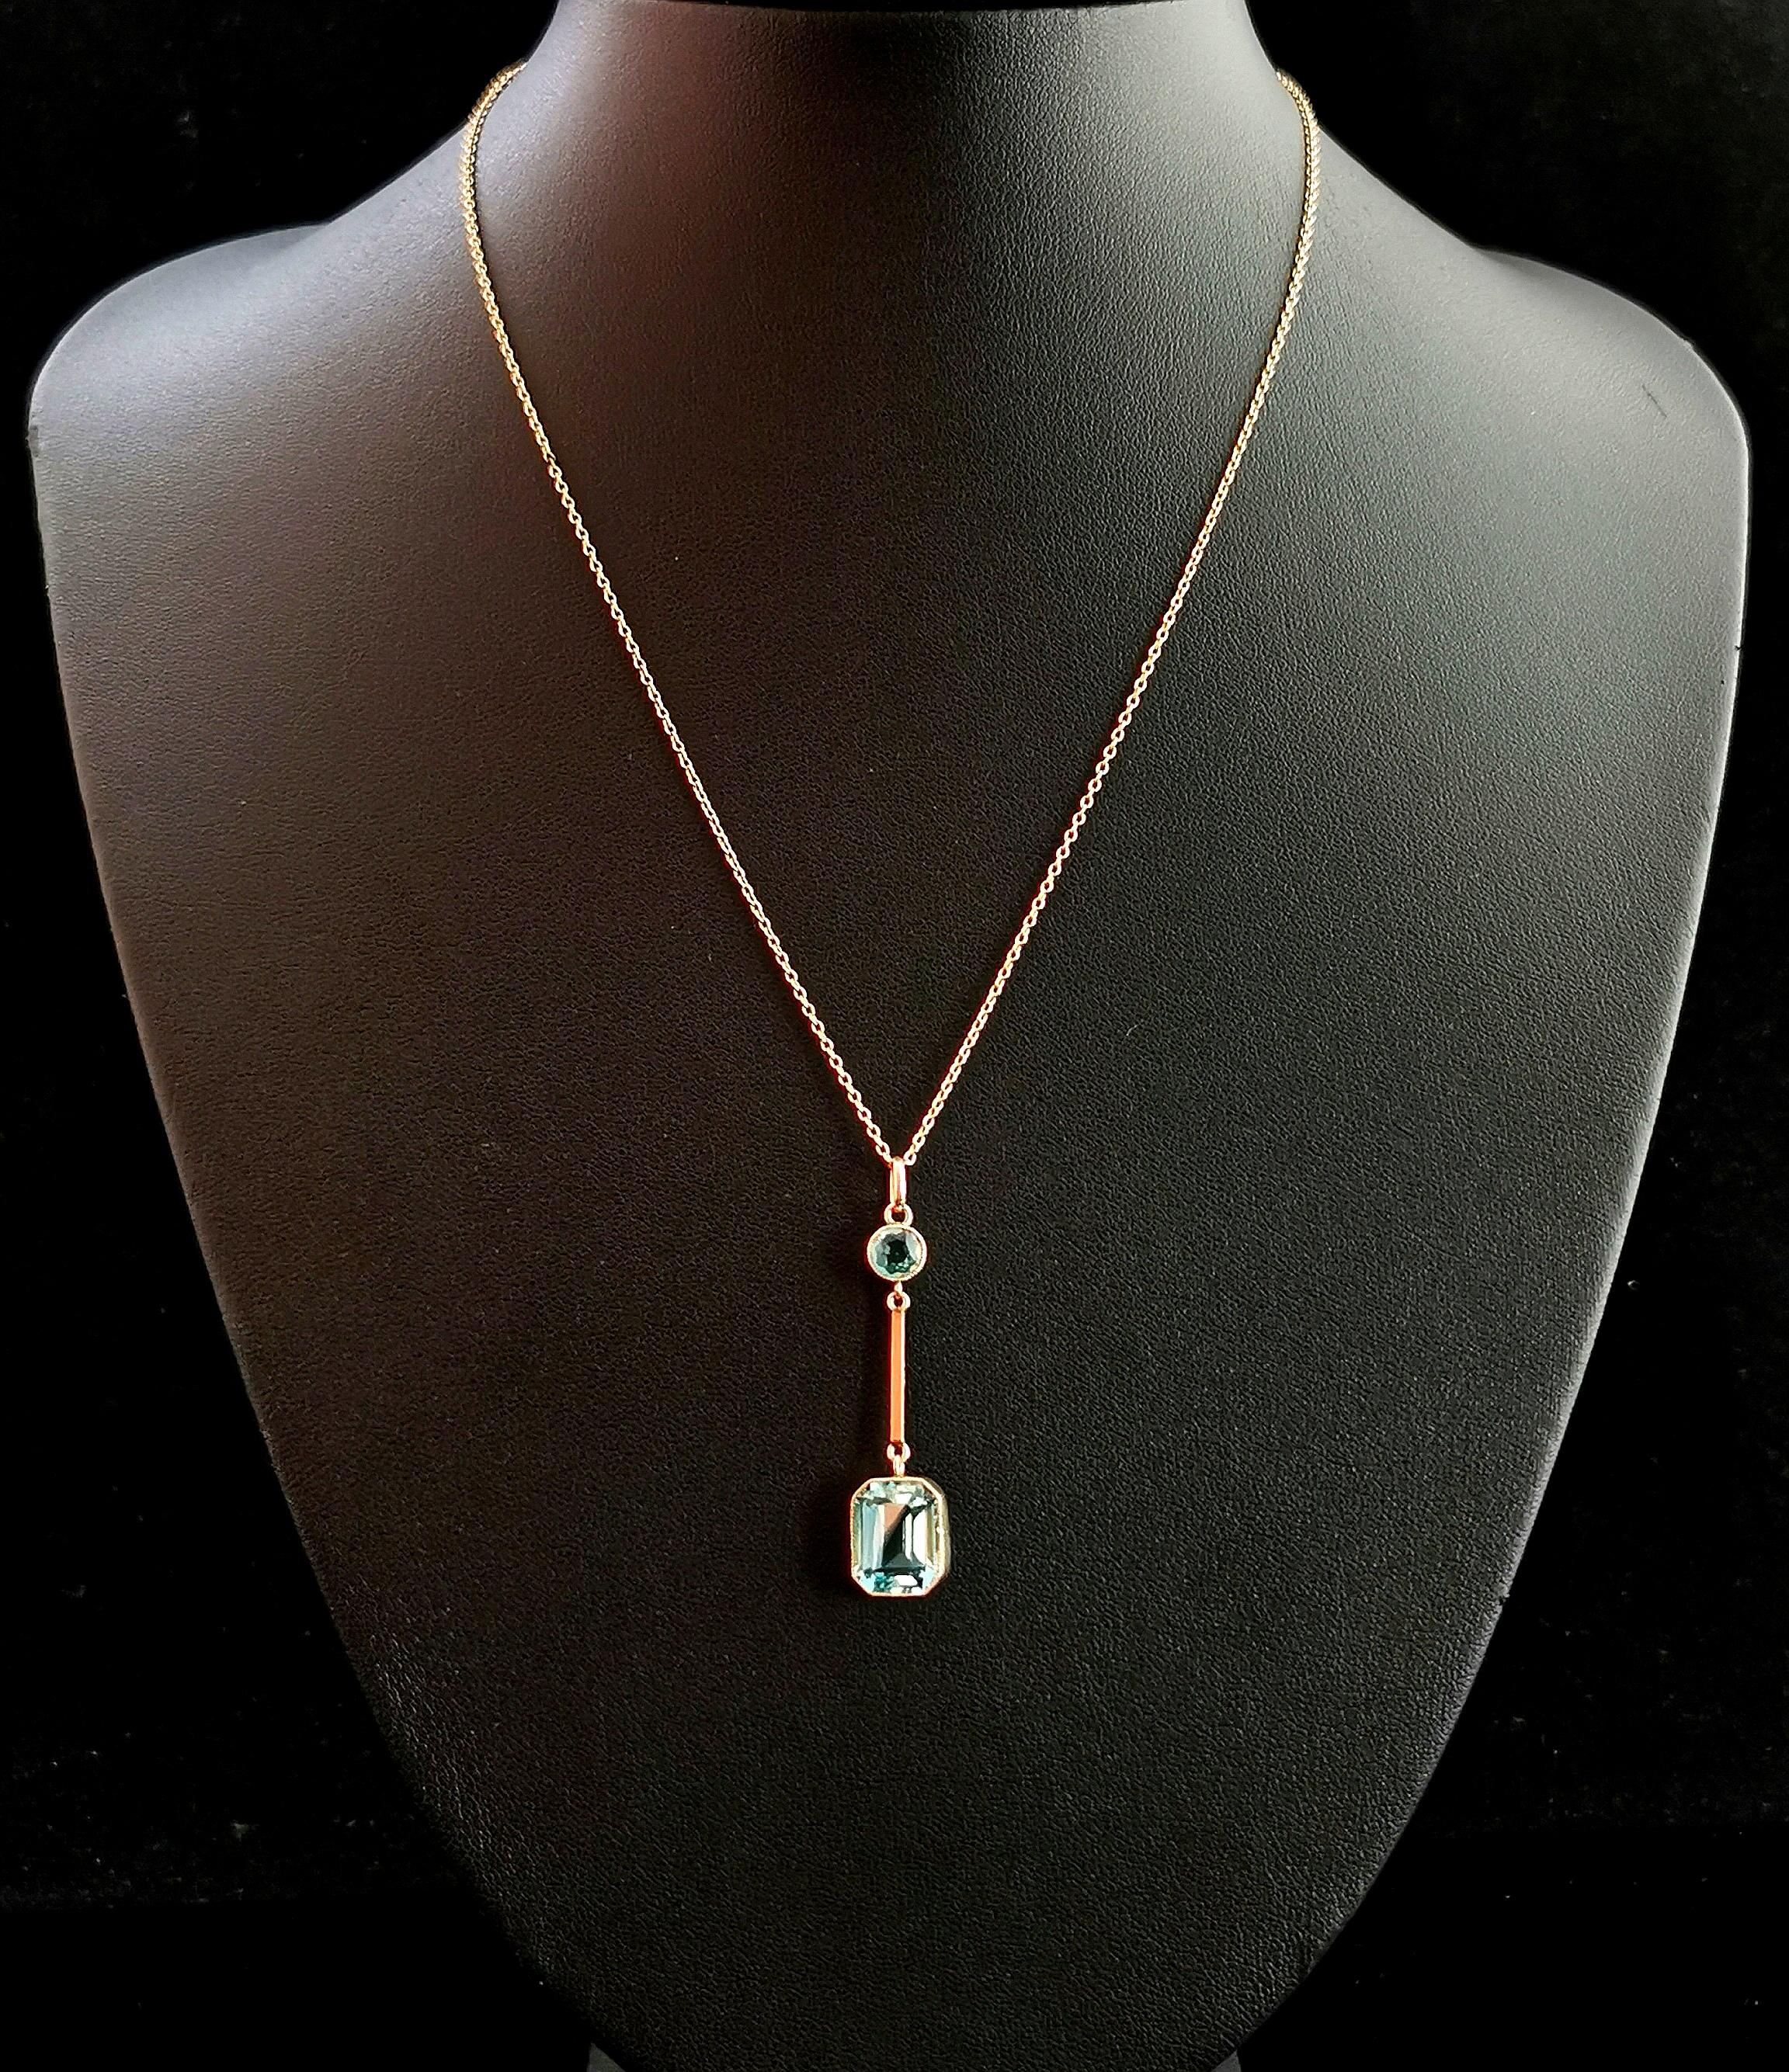 A beautiful Antique Art Deco 9kt Rose gold and blue Zircon drop pendant.

The pendant has a round cut blue Zircon to the top beneath the bale which is intercepted by a rose gold bar drop, from here there is a beautiful emerald cut blue Zircon which